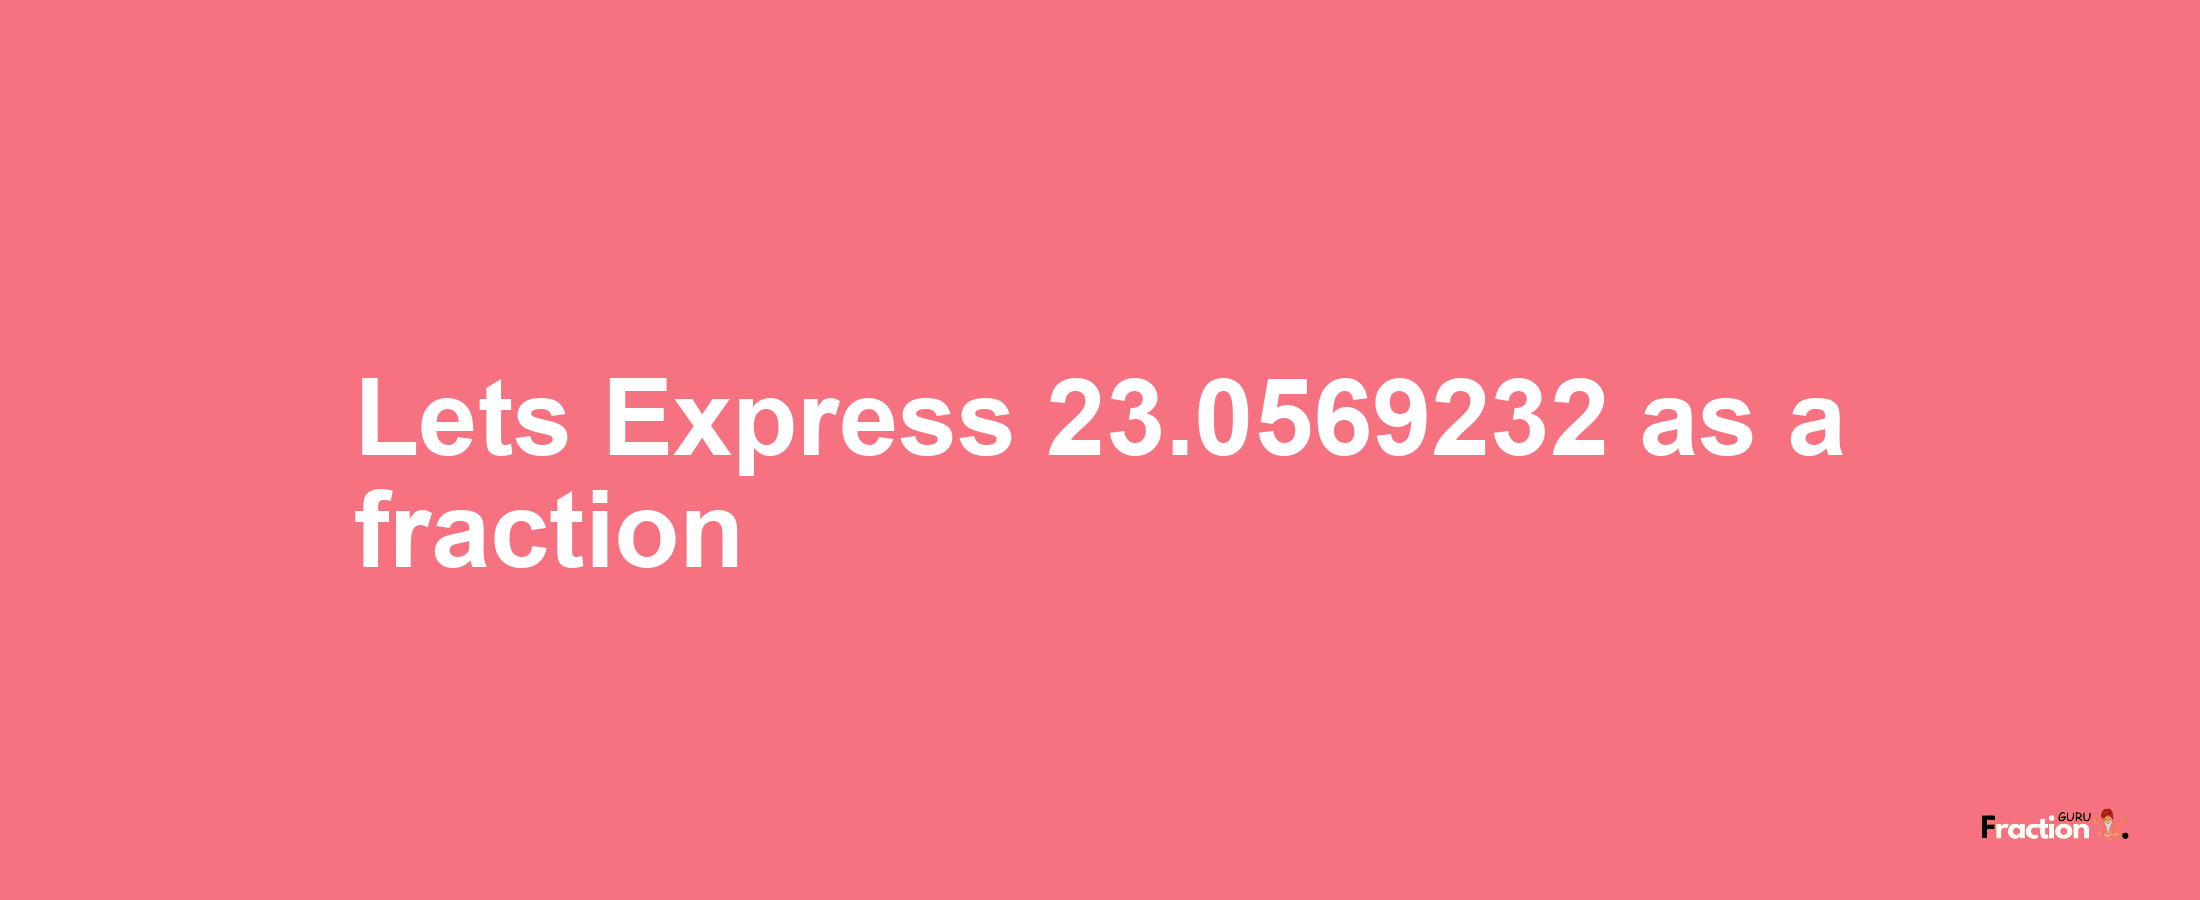 Lets Express 23.0569232 as afraction